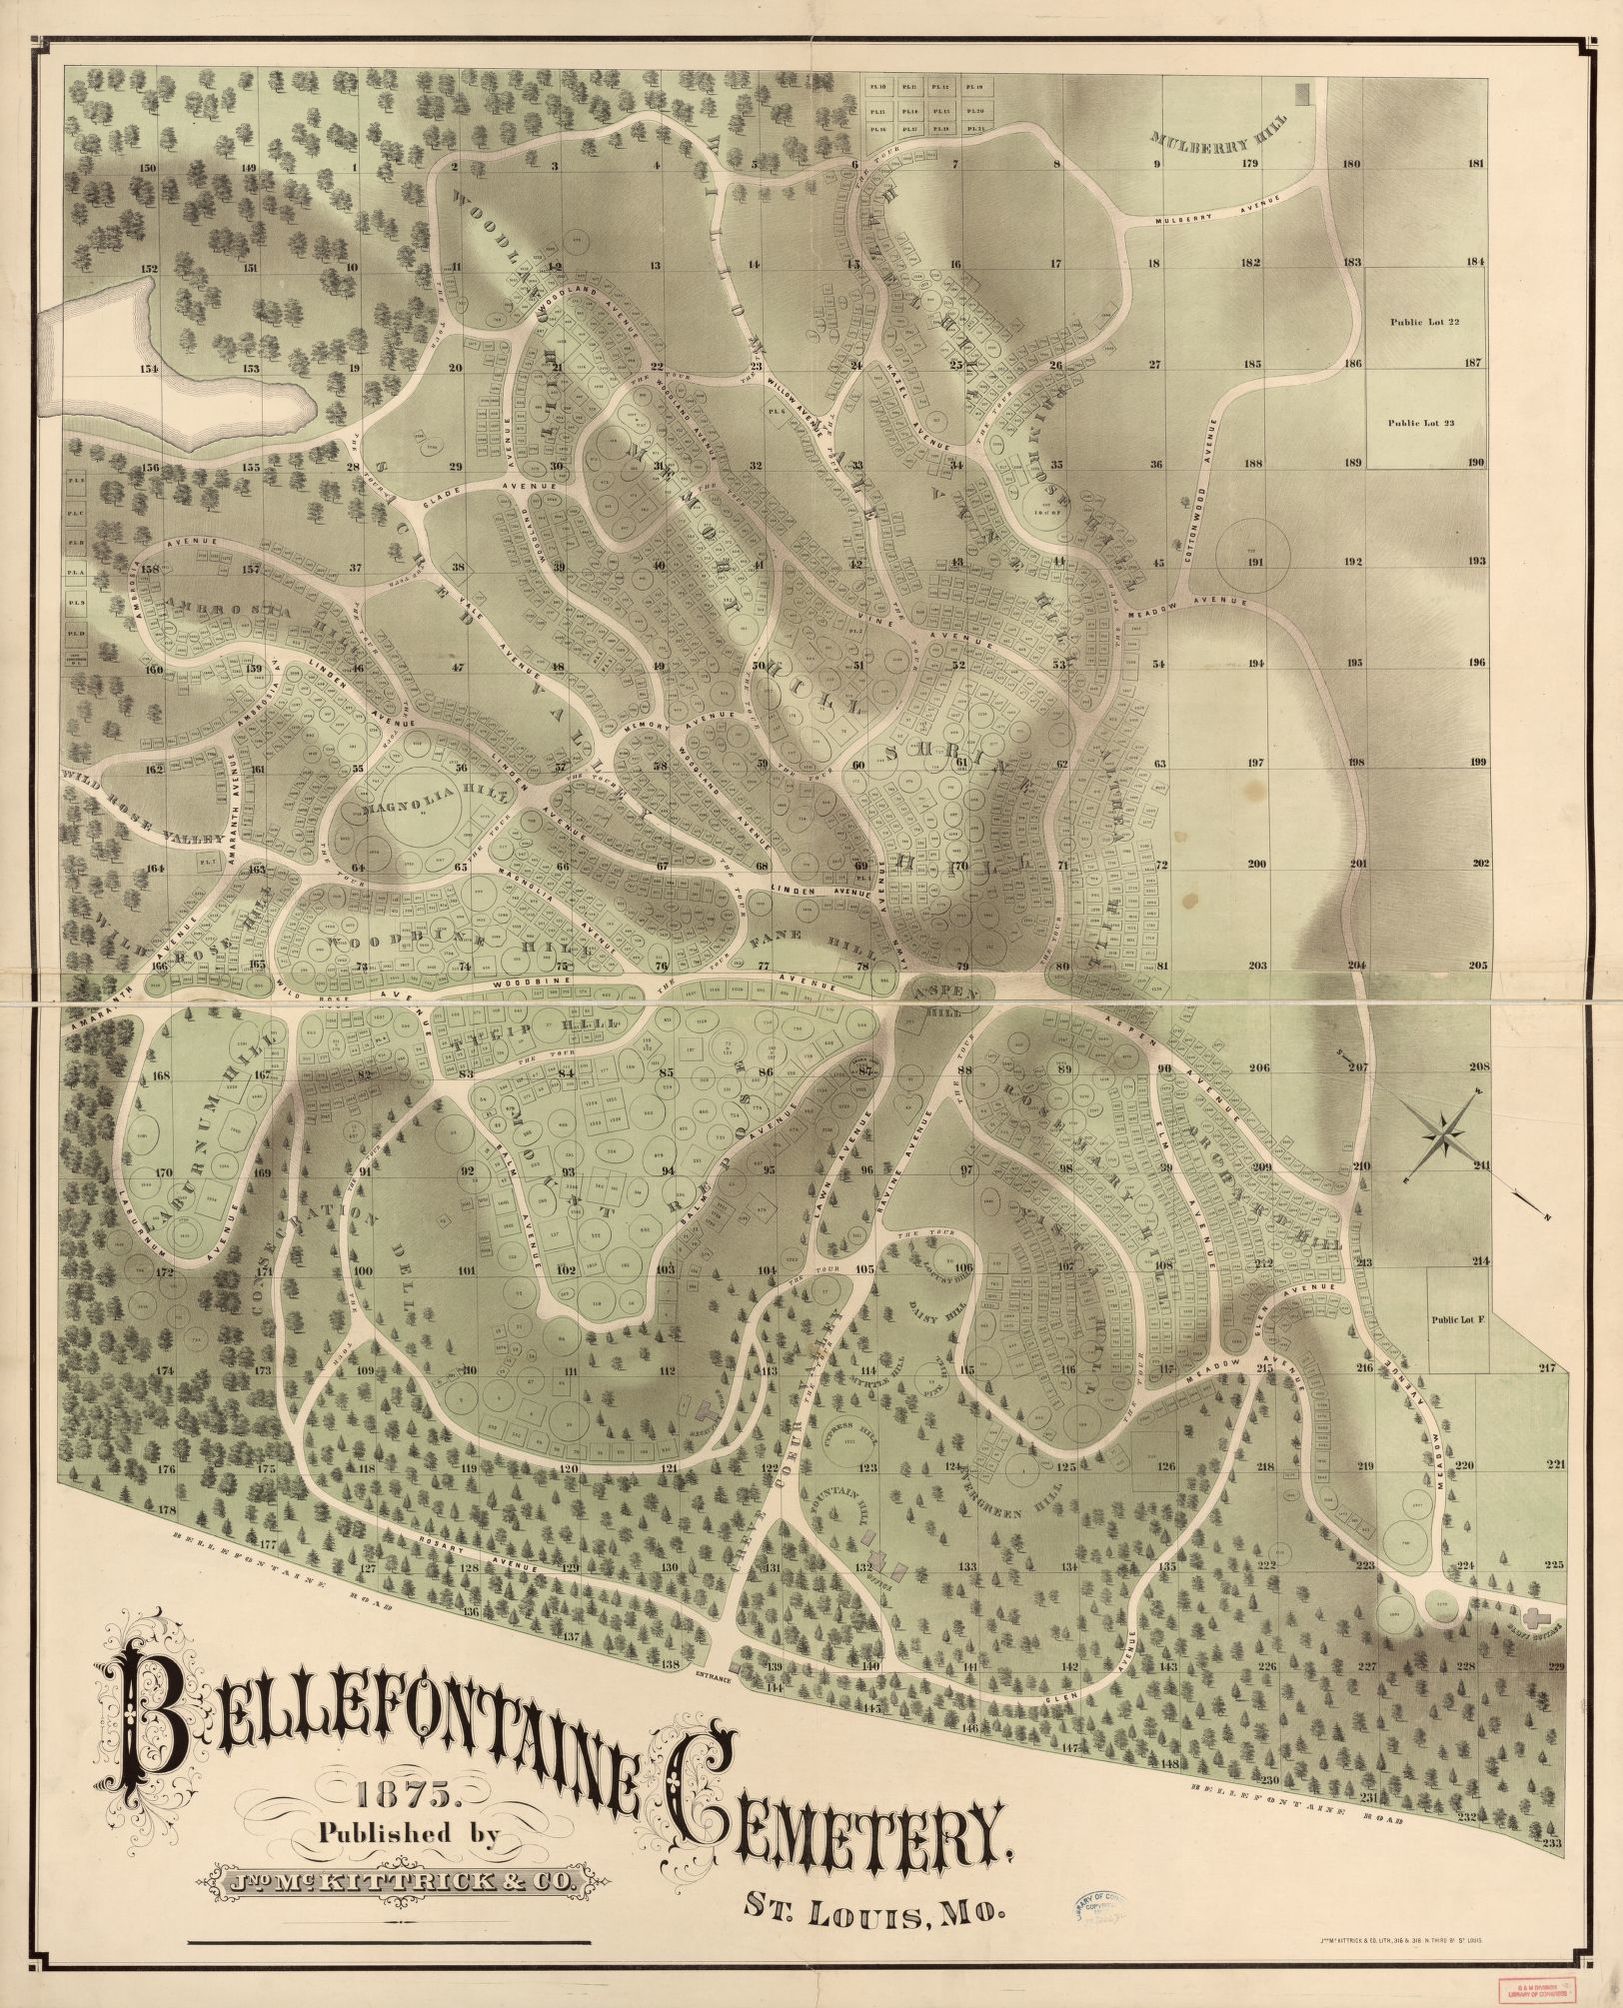 Older Bellefontaine Cemetery Map